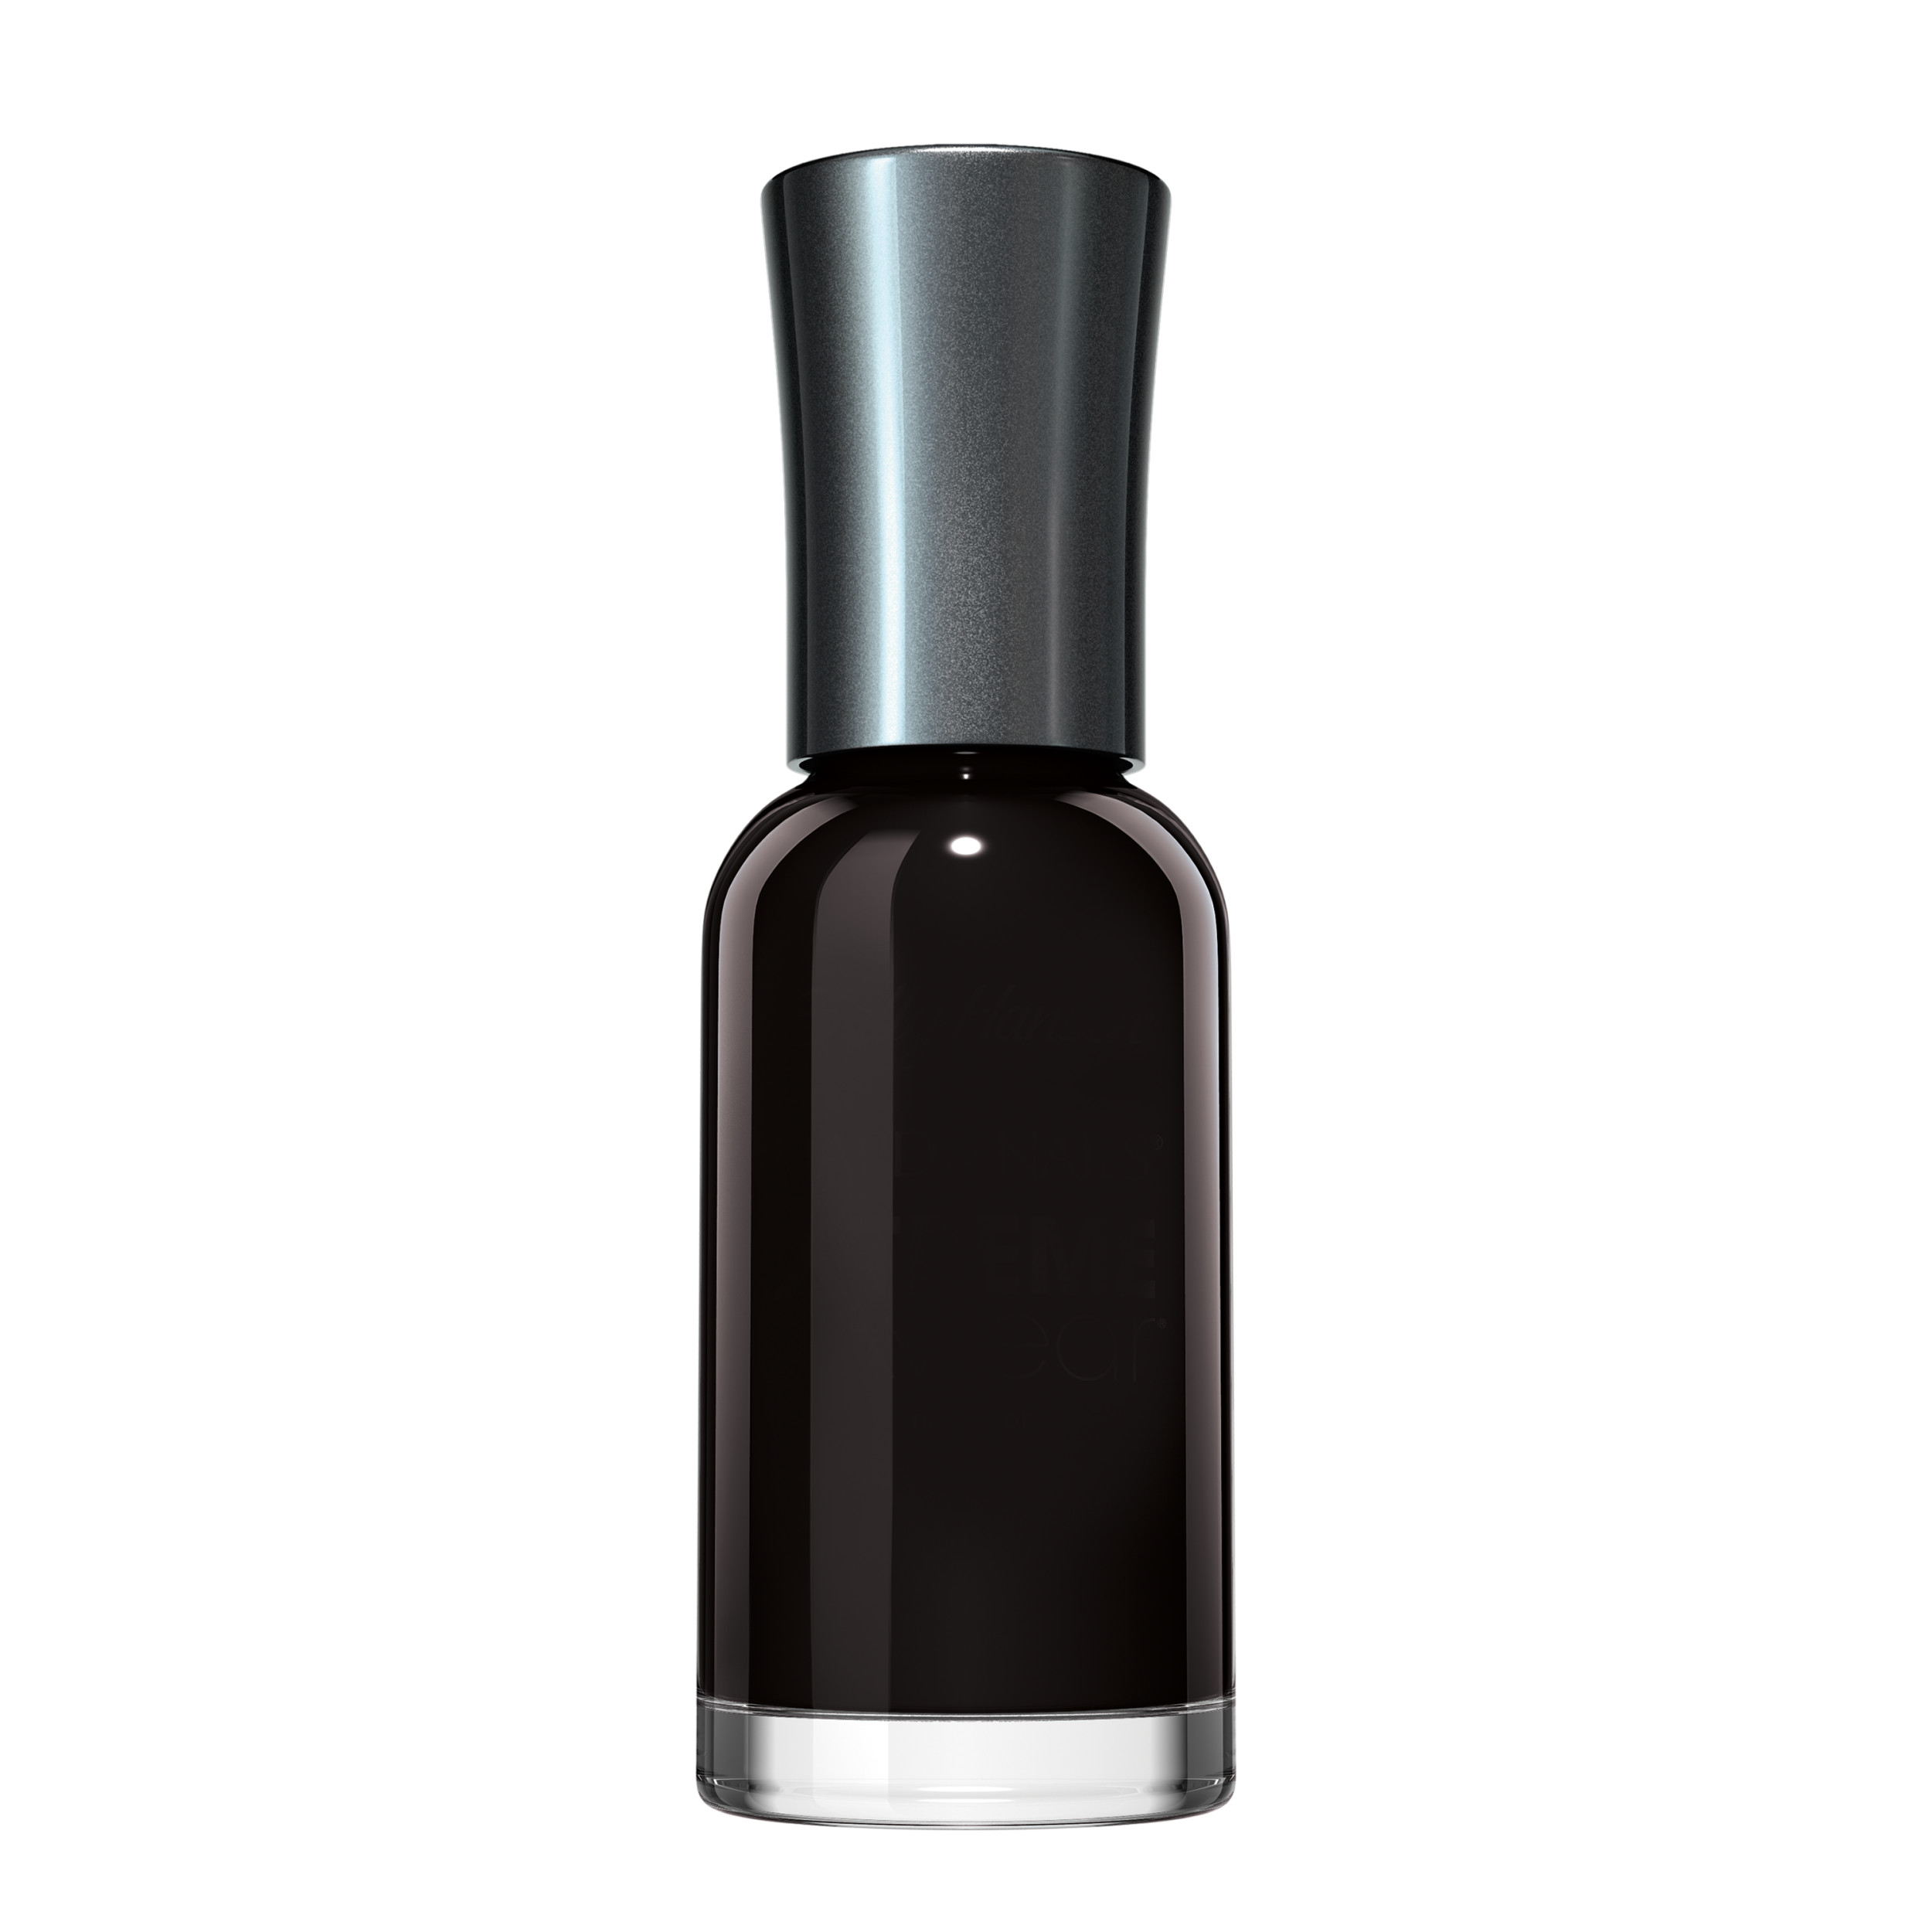 Sally Hansen Xtreme Wear Nail Polish, Black Out, 0.4 fl oz, Chip Resistant, Bold Color - image 5 of 10